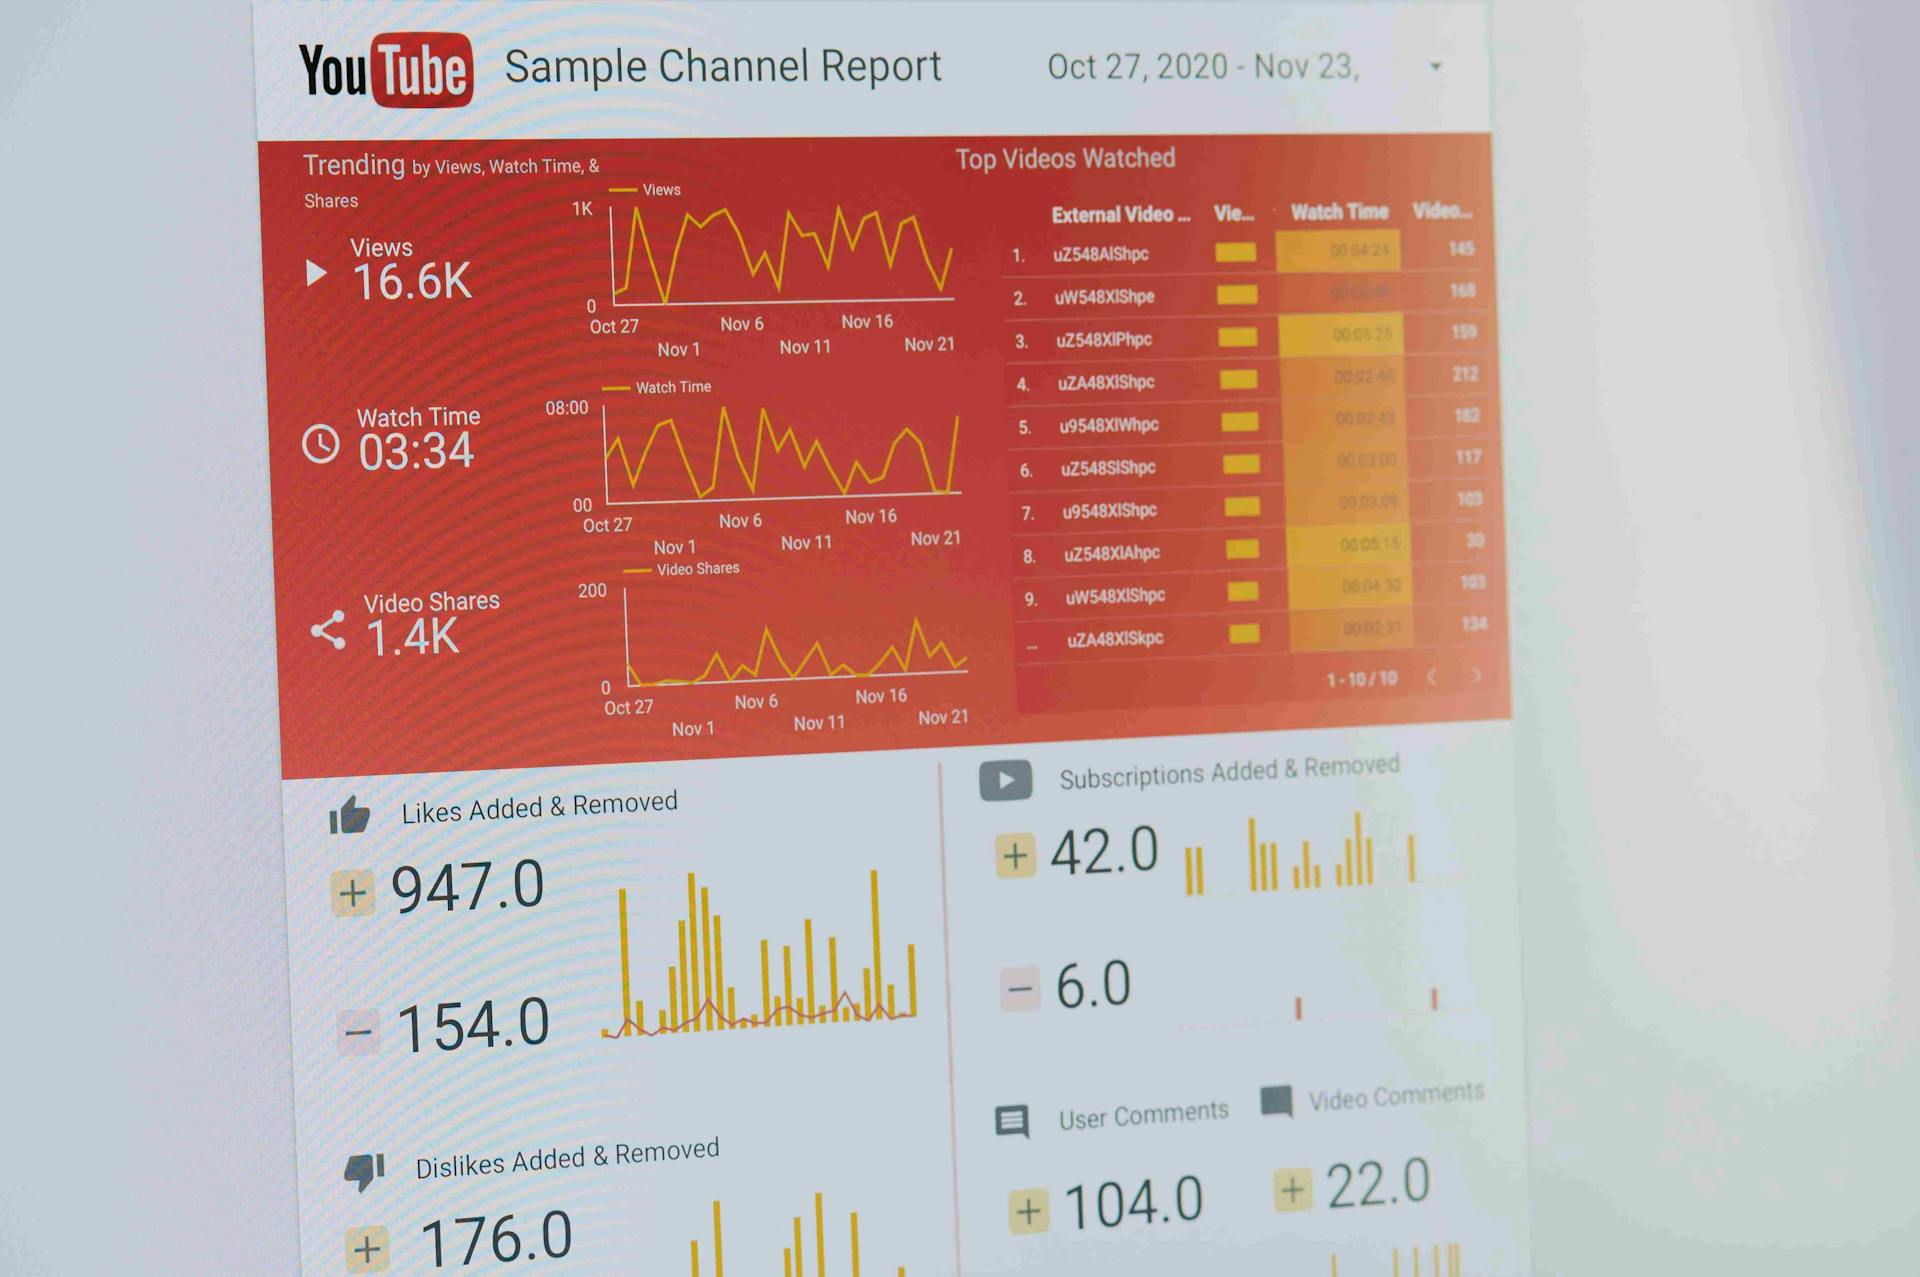 Screenshot of YouTube Sample Channel Report